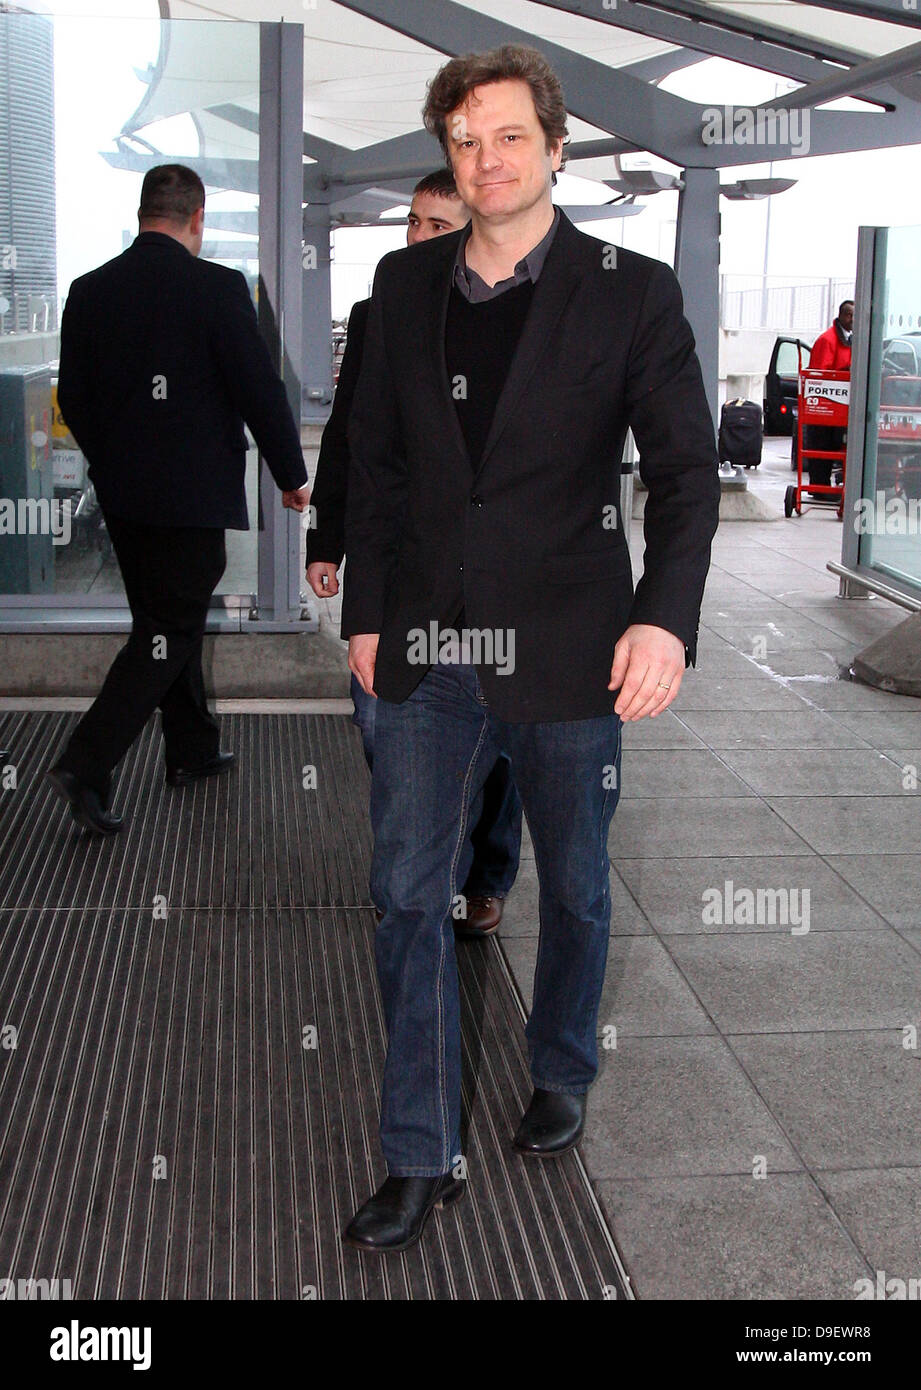 Colin Firth arriving at the airport London, England - 22.02.11 Stock Photo